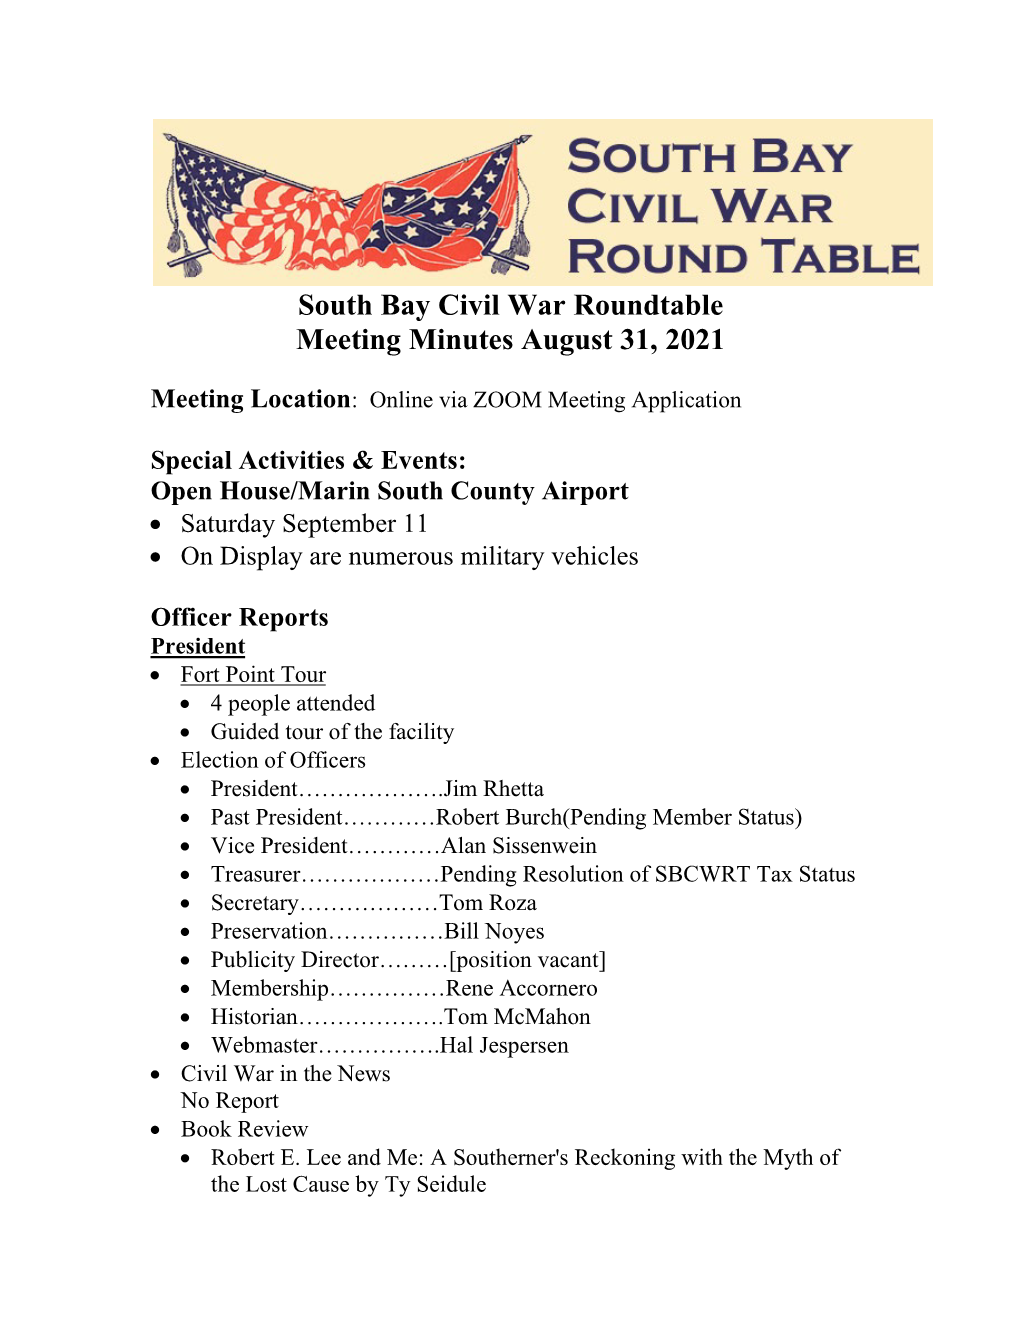 South Bay Civil War Roundtable Meeting Minutes August 31, 2021